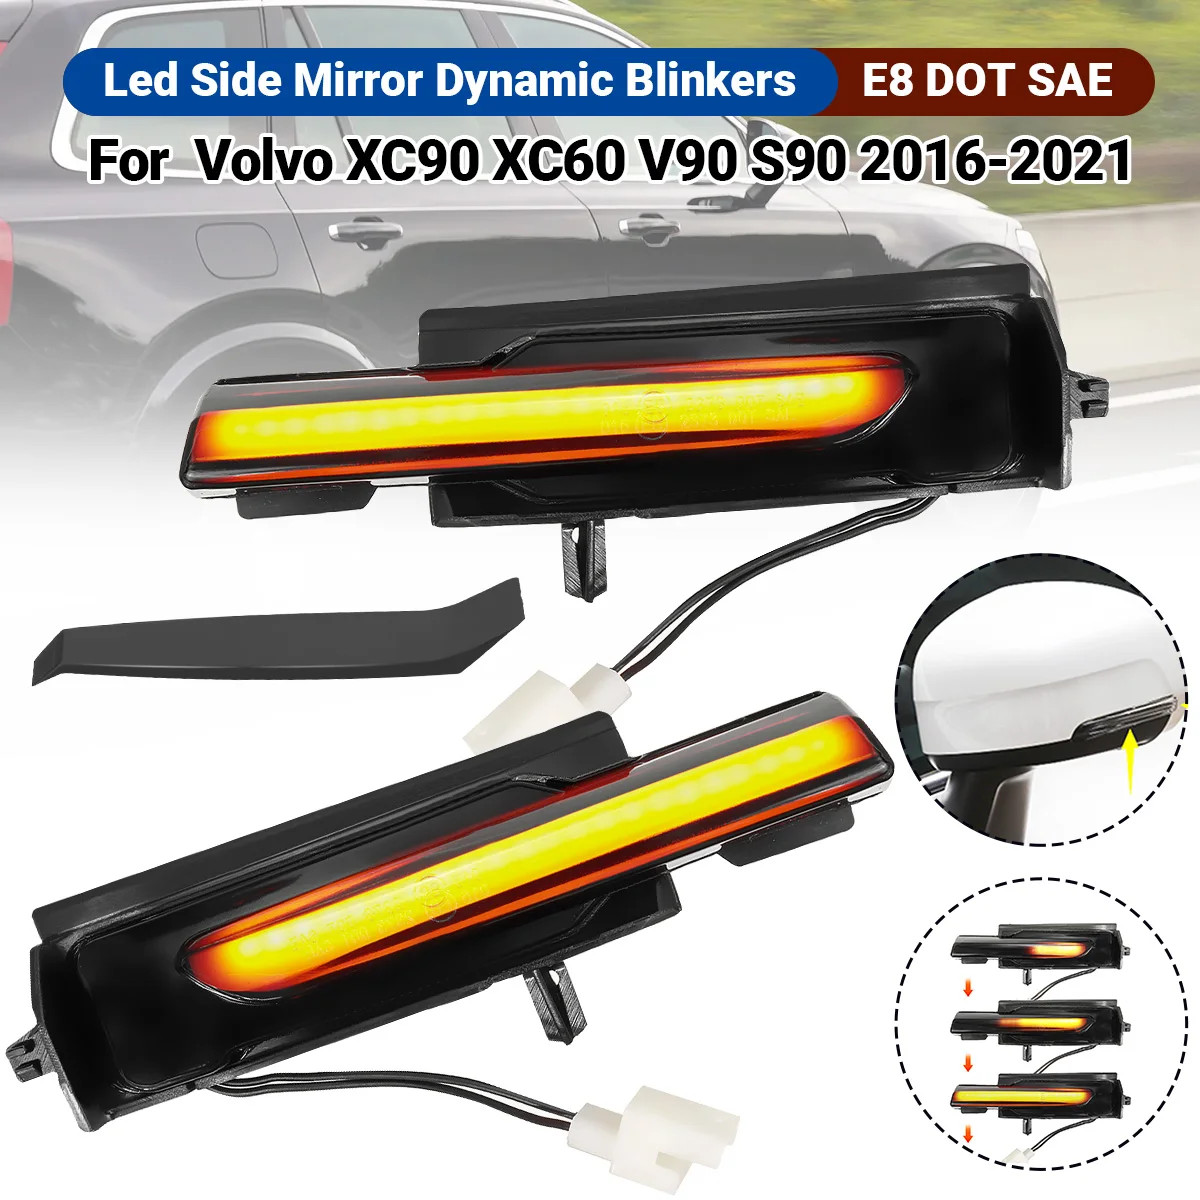 

2pcs Led Side Wing Rear View Mirror Repeater Dynamic Turn Signal Light Indicator Blinker For Volvo XC90 XC60 V90 S90 2016-2021